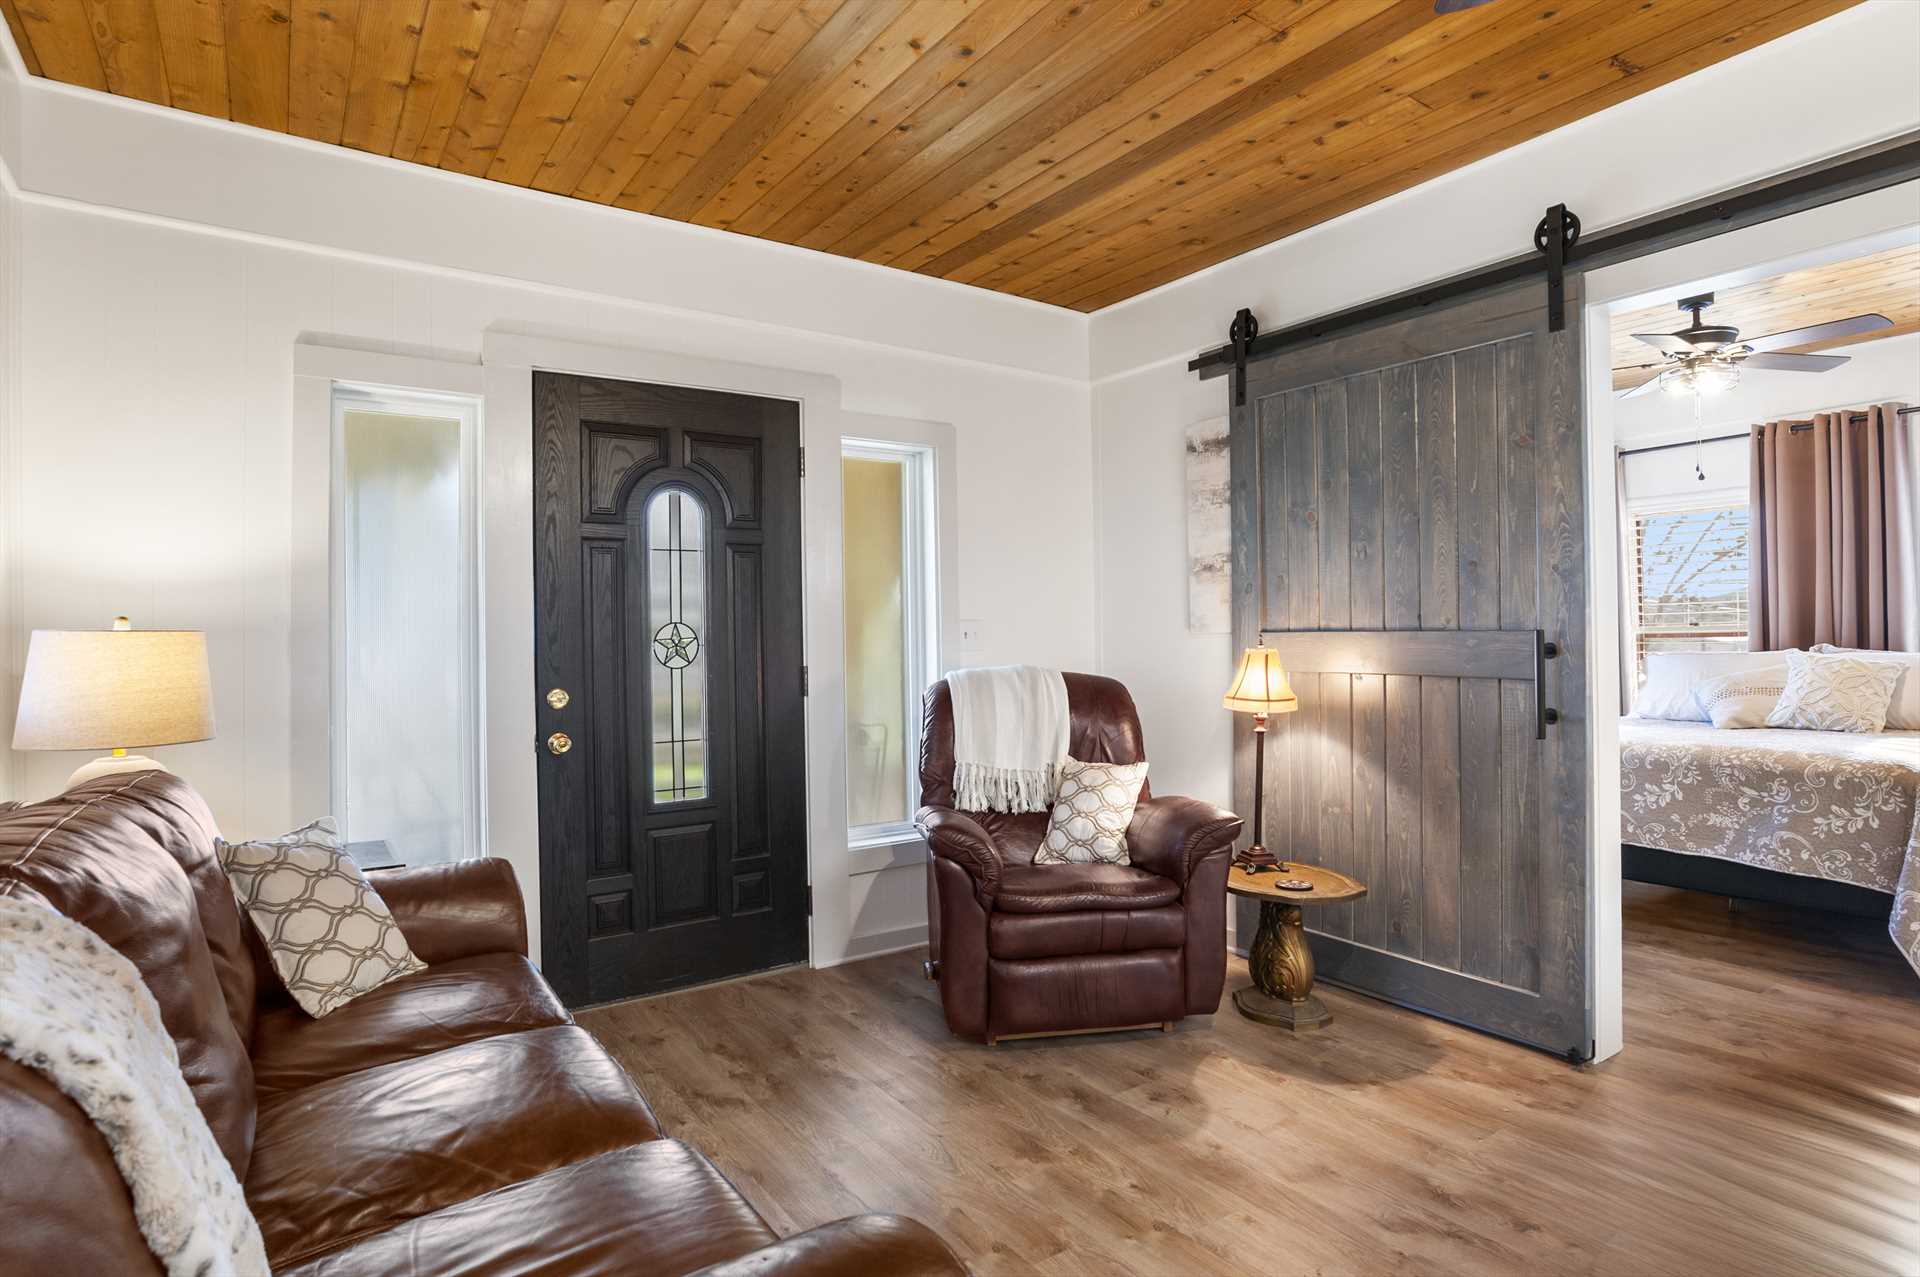                                                 Check out the rustic, yet modern, sliding barn-door entrance to the second bedroom!